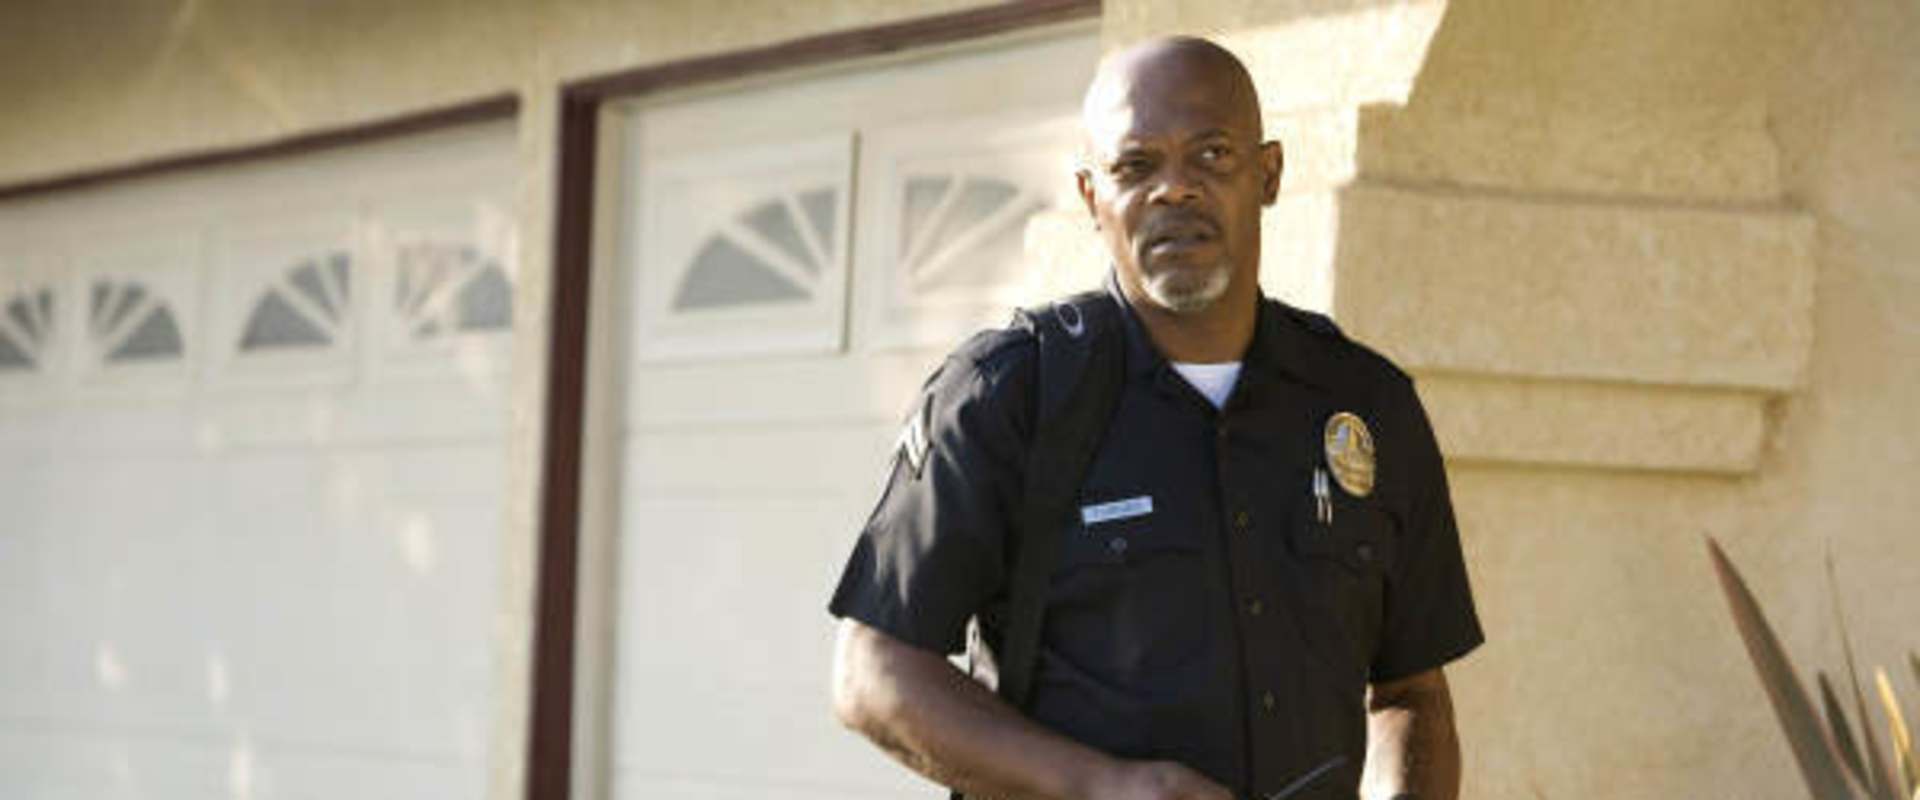 Lakeview Terrace background 2